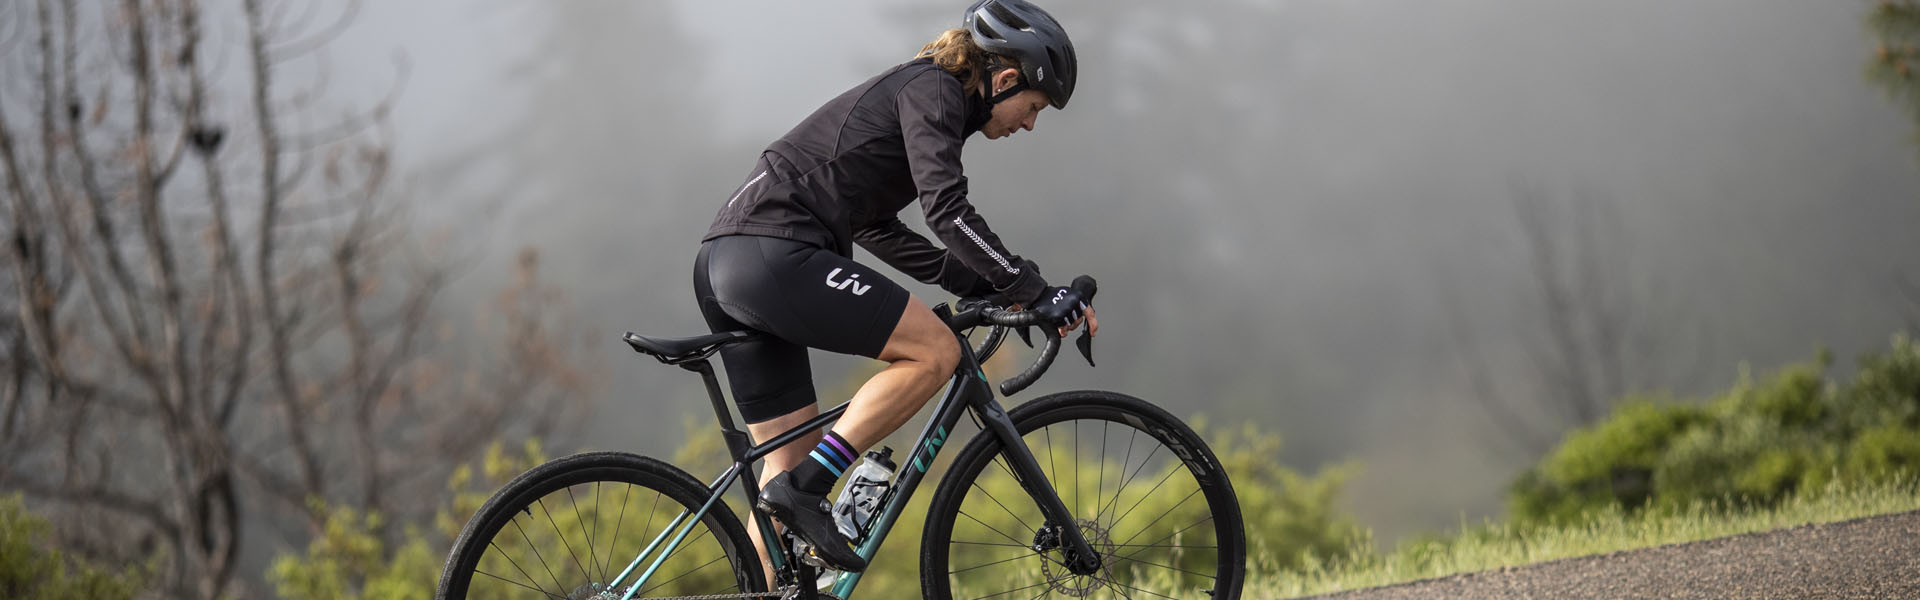 https://static.giant-bicycles.com/Images/Shared/Pages/Local/road_gear_header_liv_1568722902.jpg